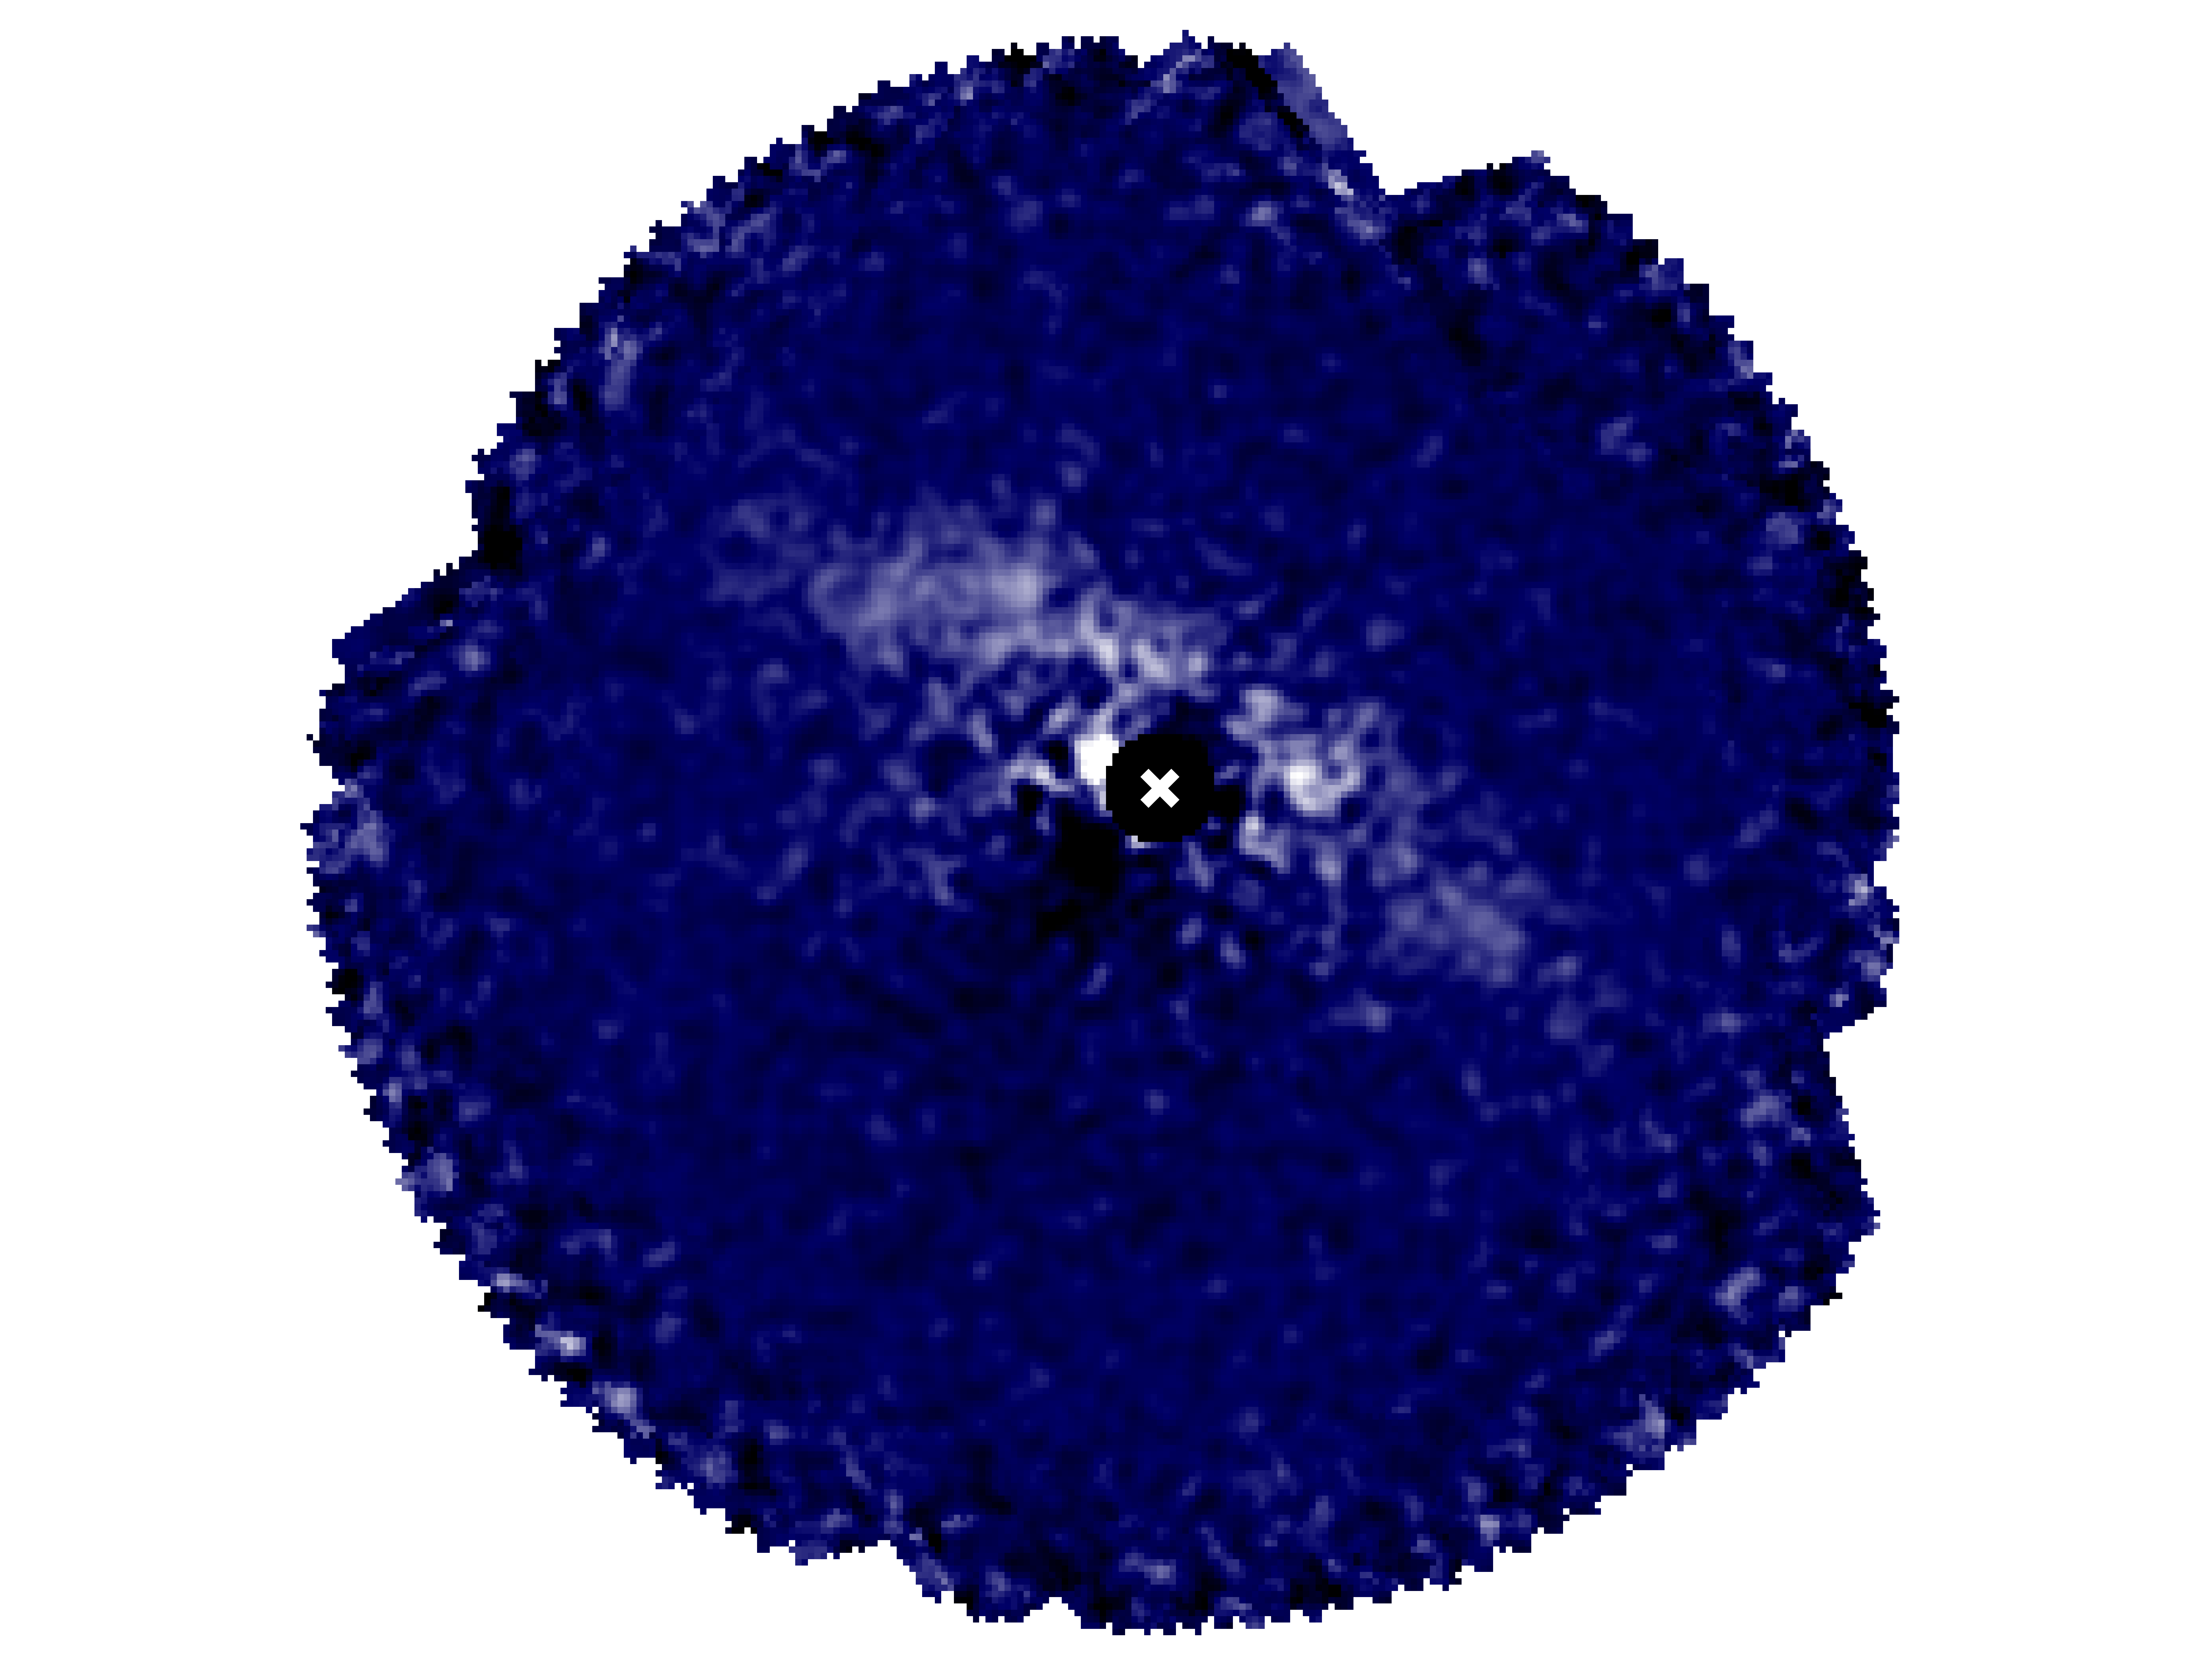 GPI detection of dust-scattered star light around HD 131835 in H-band linearly polarized intensity. The focal plane mask (filled black circle) was used to block the light from the star (white x). The stronger forward scattering makes the front (NW) side of the disk more apparent. A weaker brightness asymmetry is detected along the major axis with the NE side being brighter than the SW side. By studying resolved images of debris disks, we hope to better understand the giant planet formation and evolution environment (credits: Li-Wei Hung & the GPIES team)